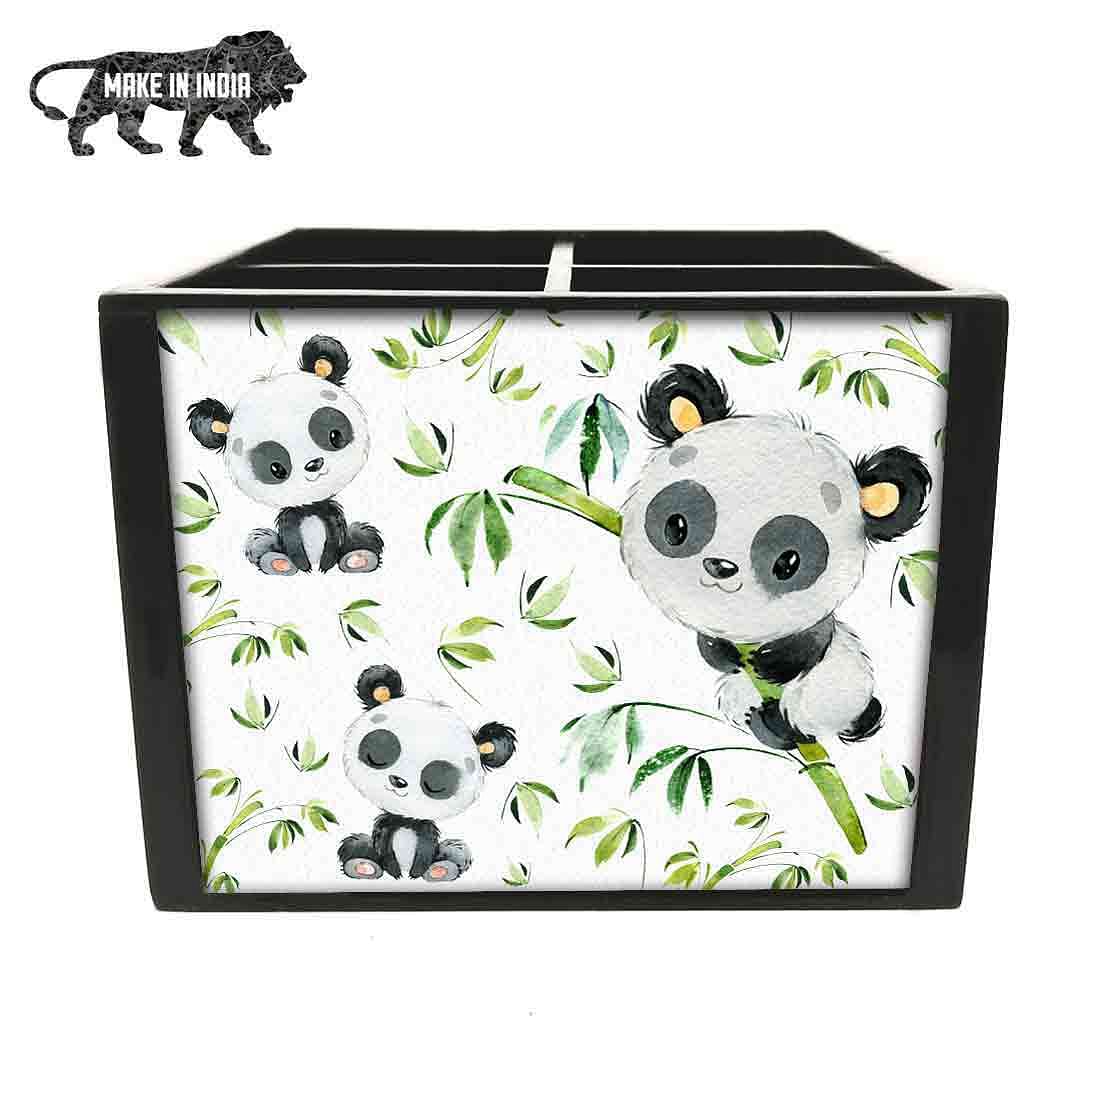 Cutlery Stand Holder Silverware Caddy Spoons Forks Organizer for Dining Table- Cute Panda Nutcase